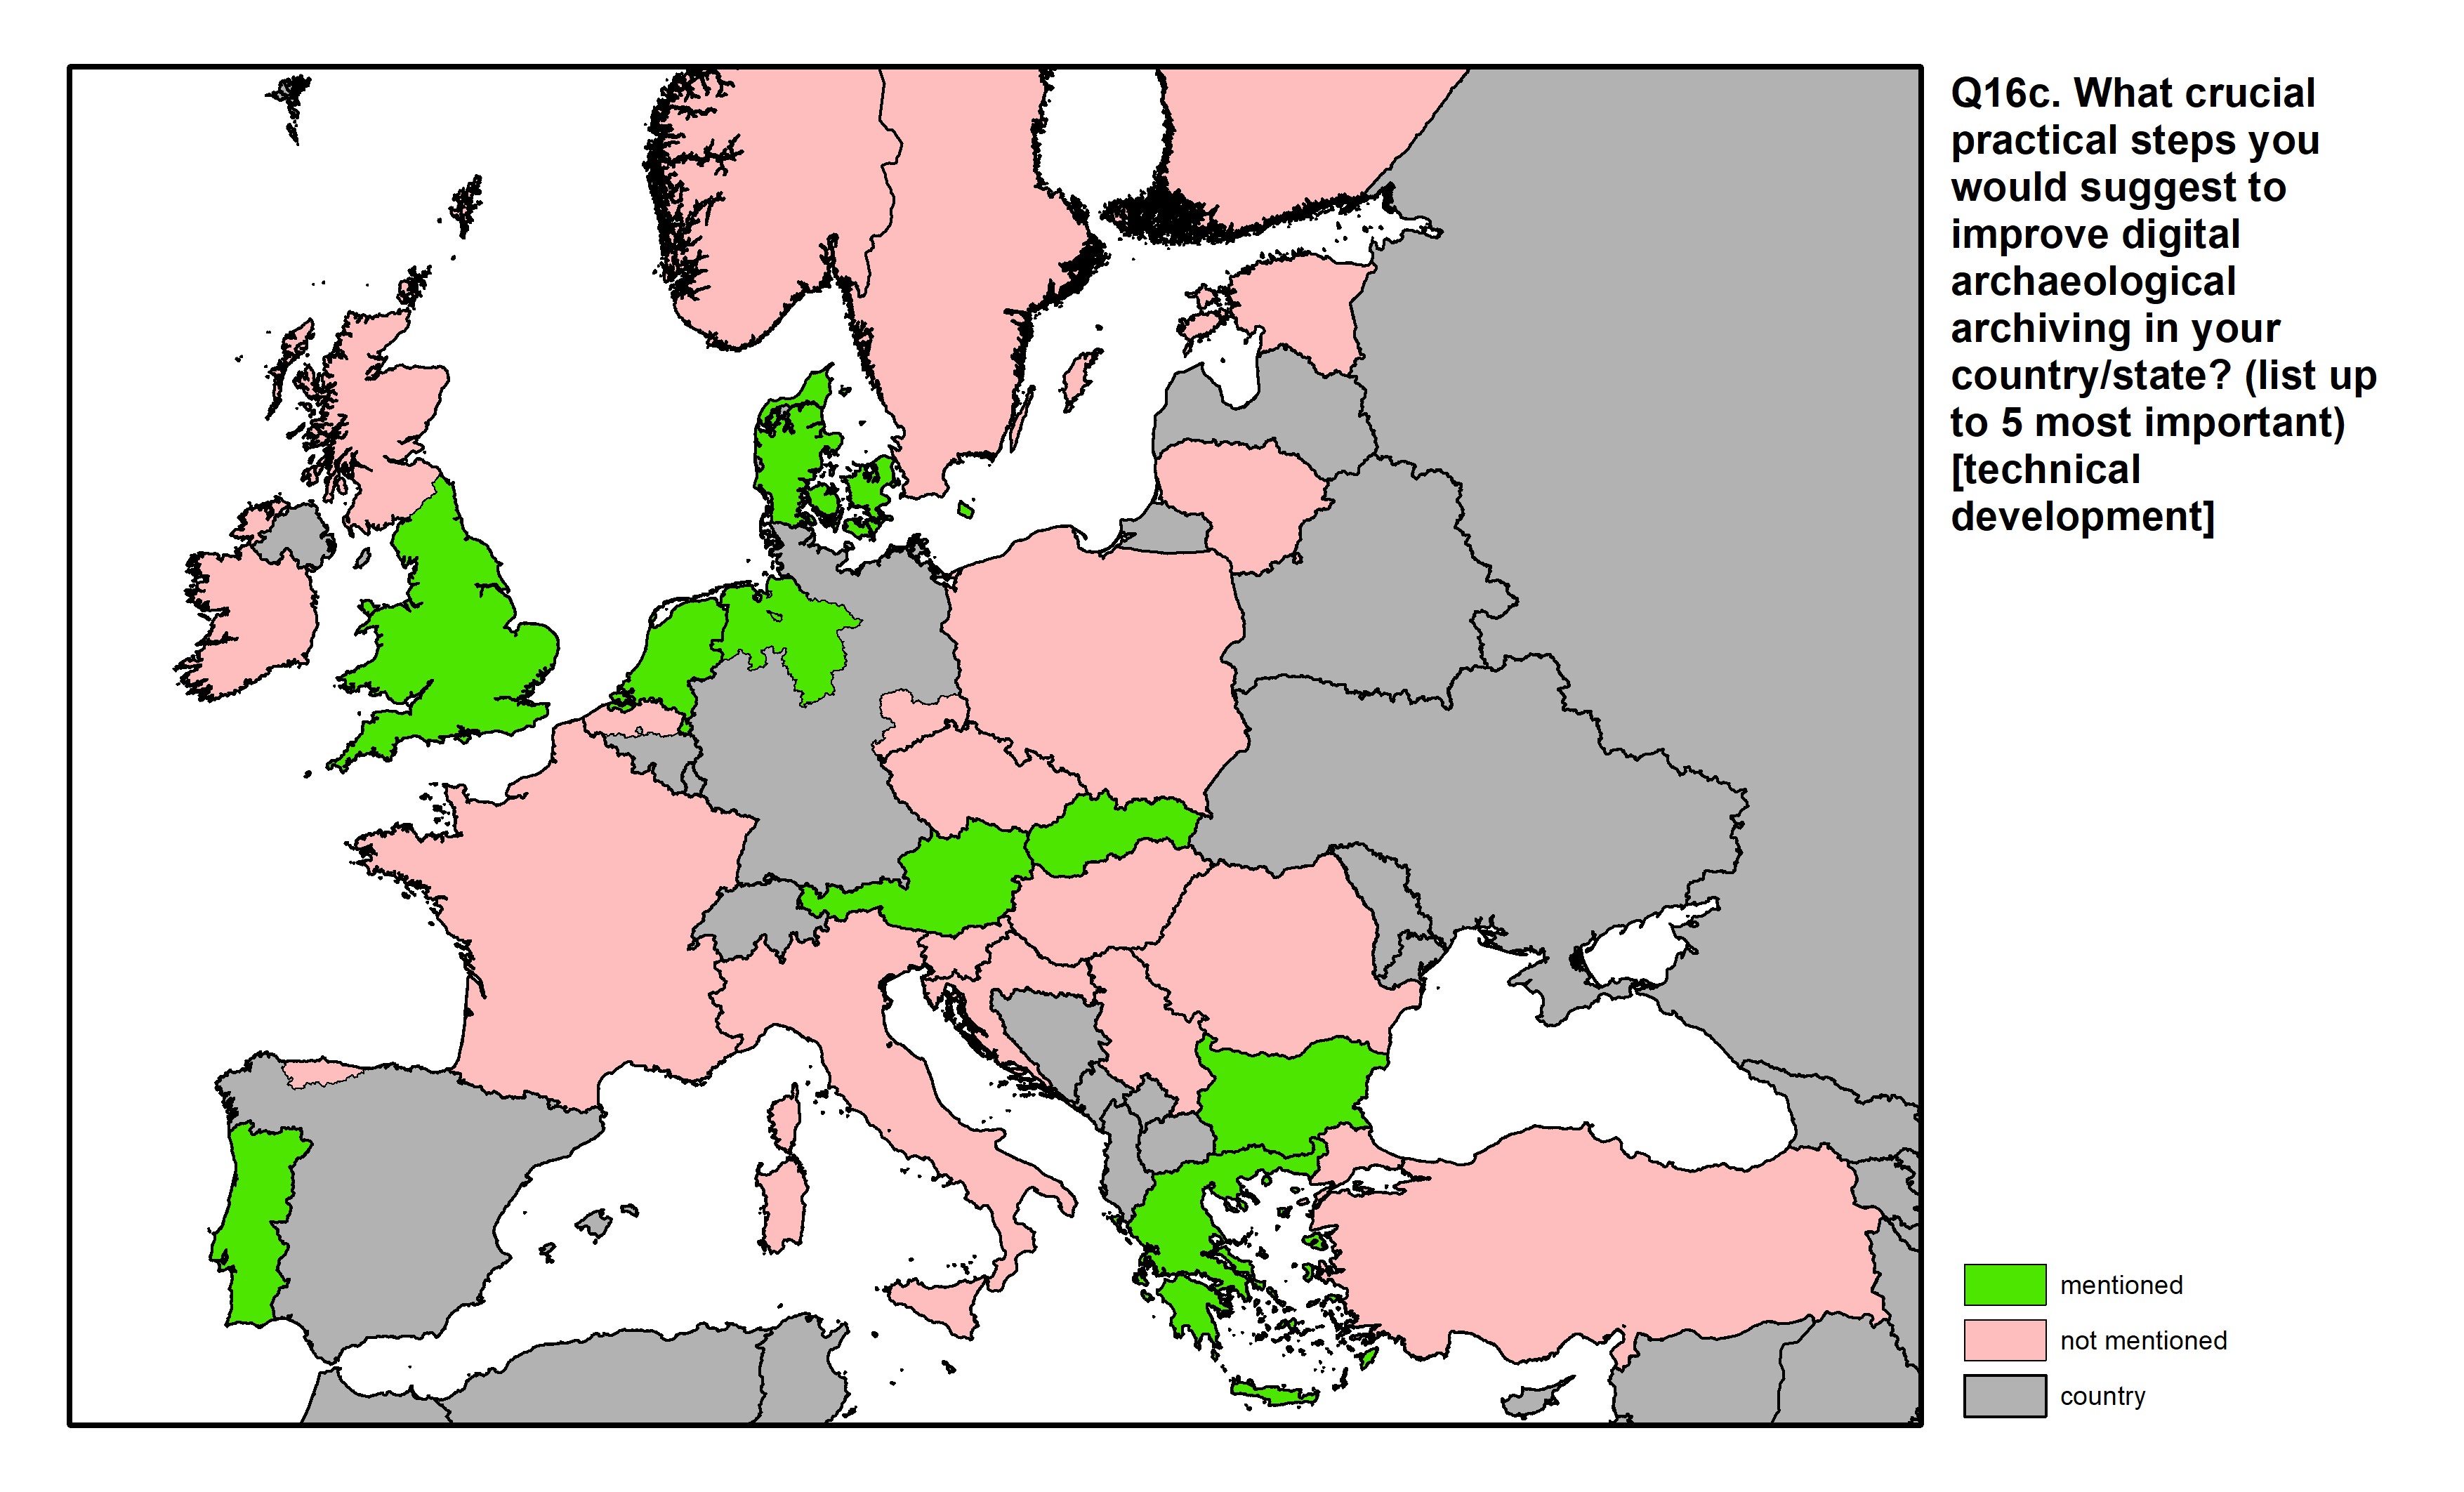 Figure 58: a map of Europe showing countries and regions in colour based on response rates to the survey question.